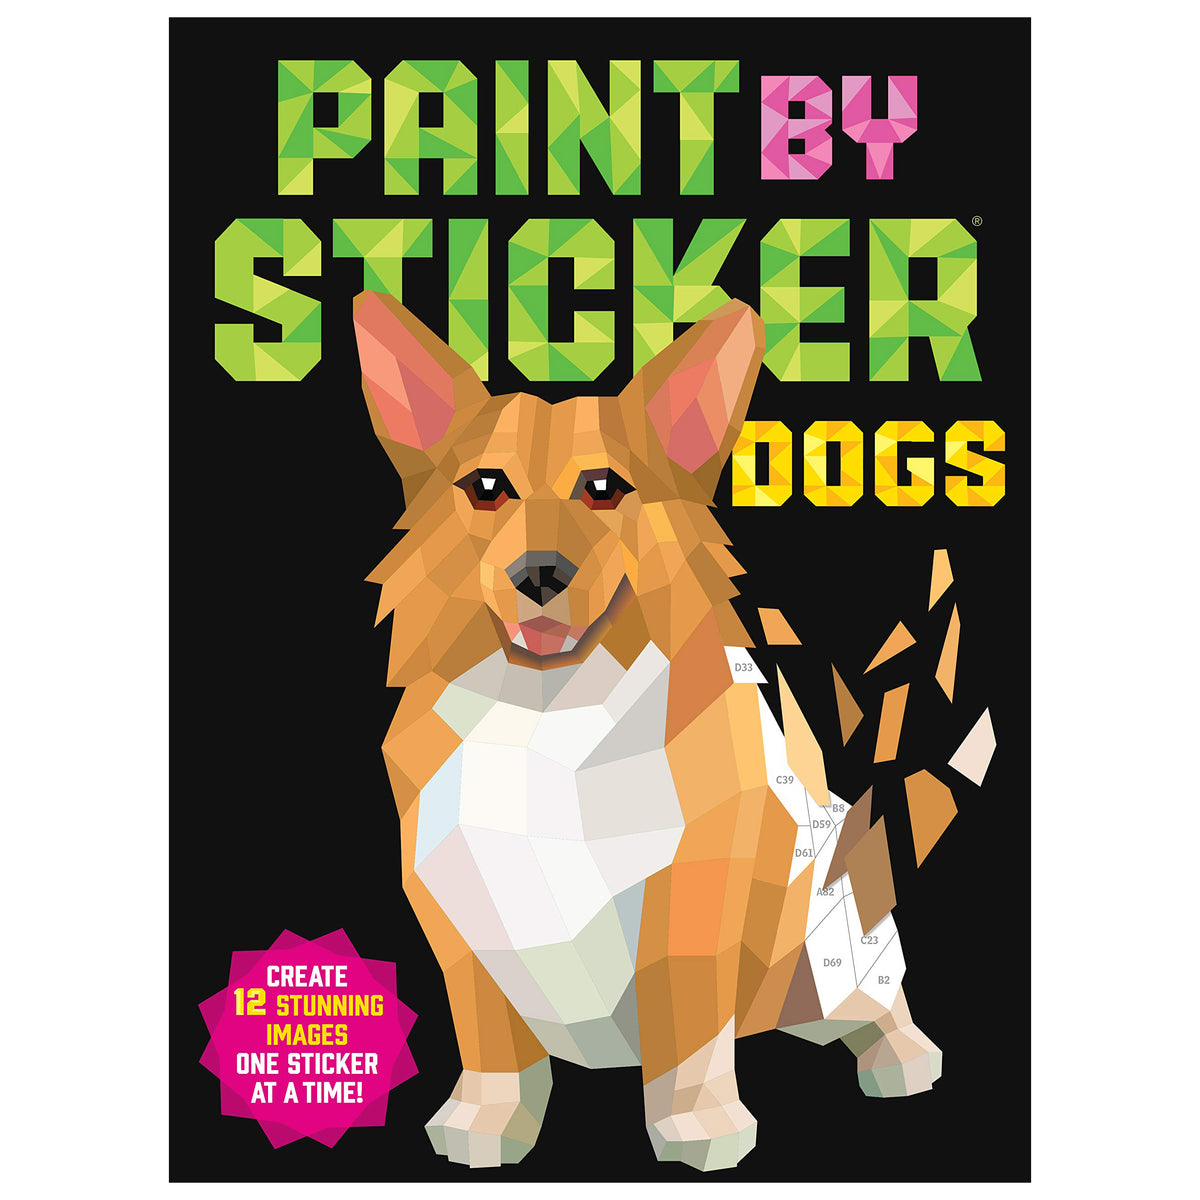 Paint By Sticker Book-Masterpieces 